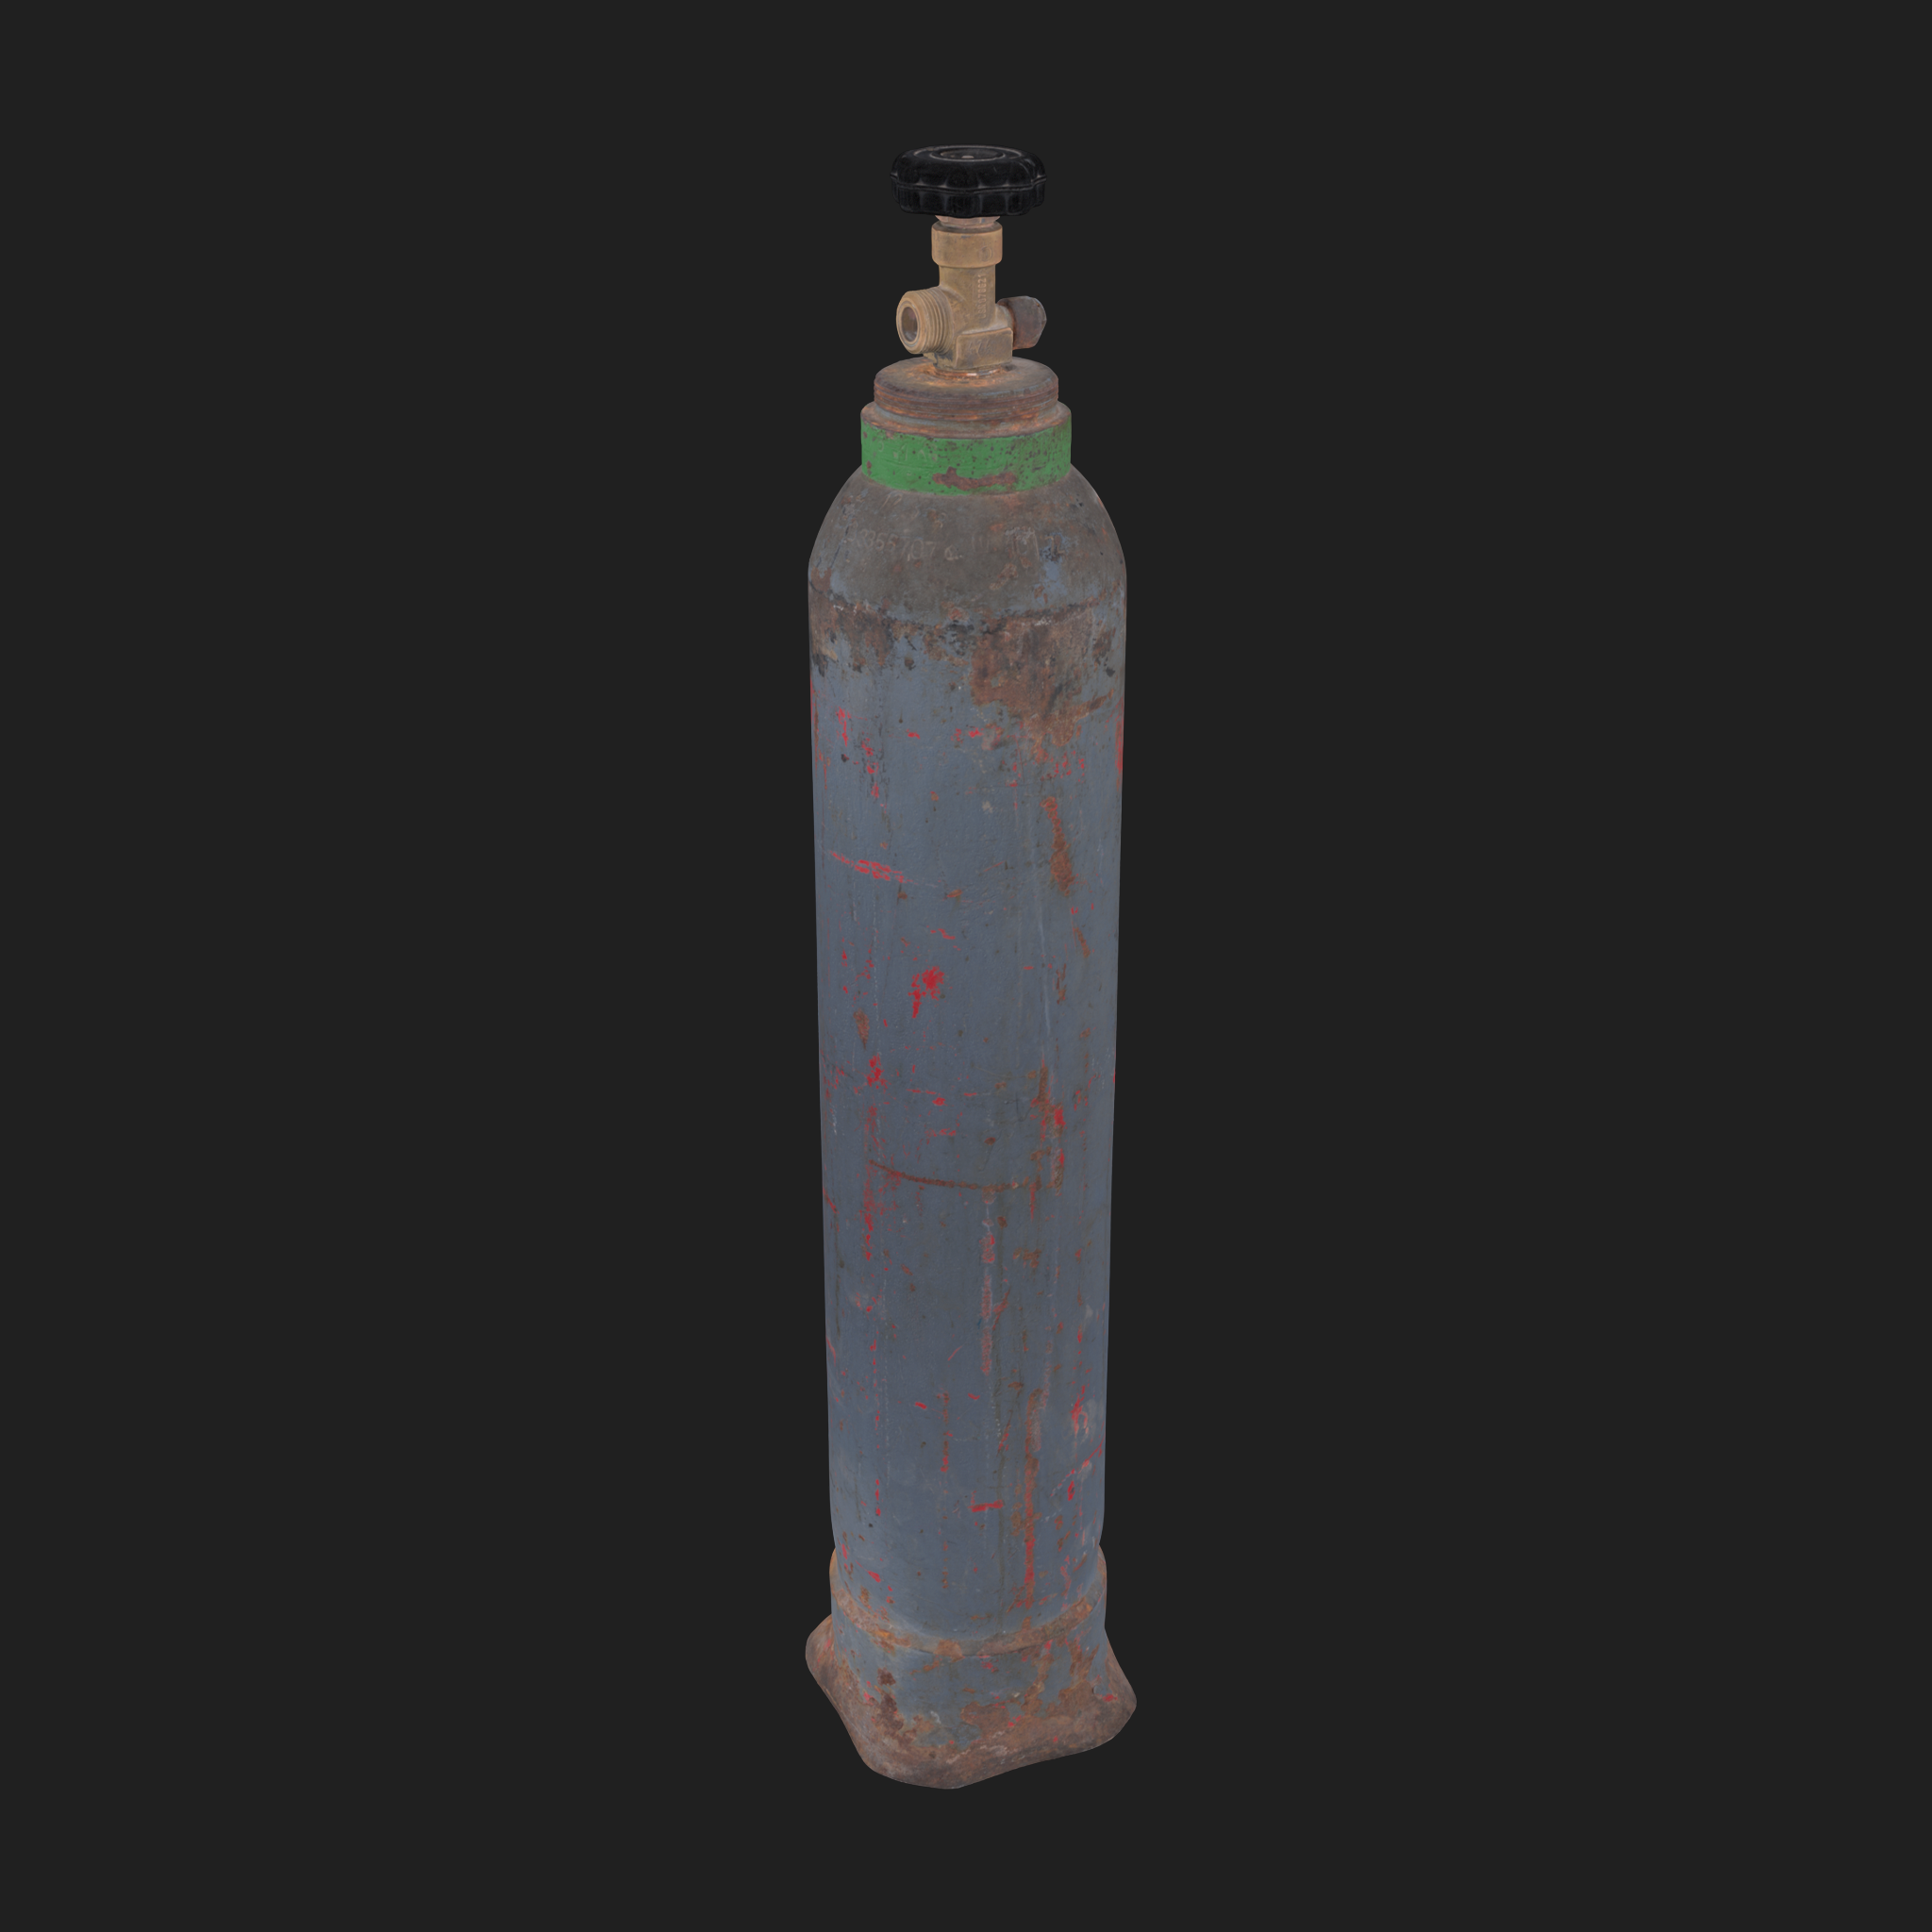 Small Gas Bottle